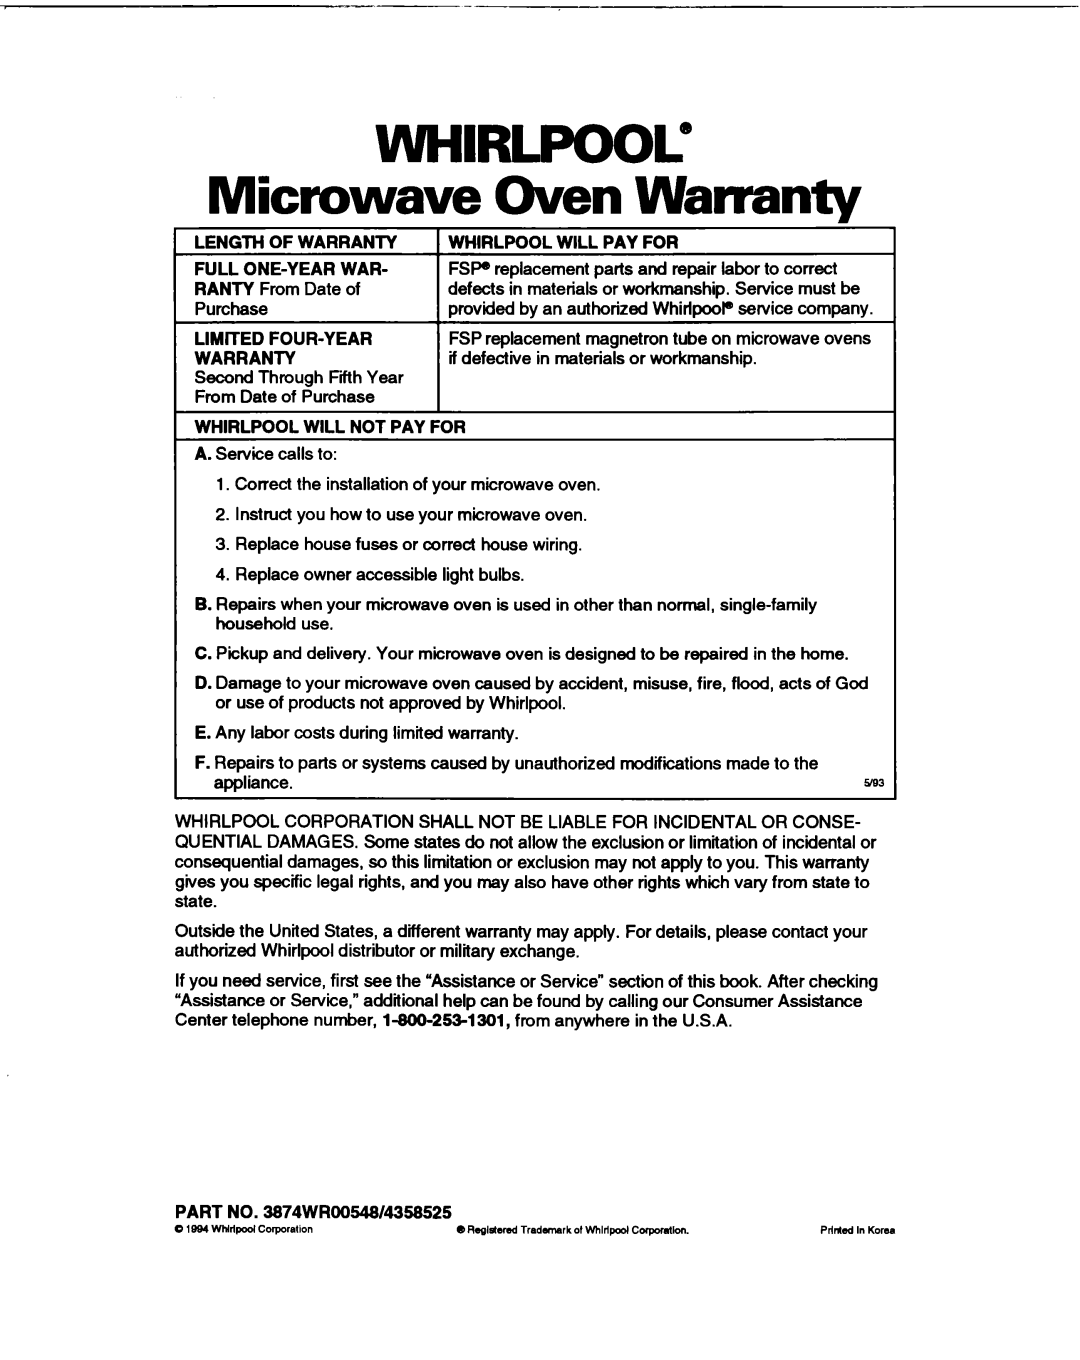 Whirlpool MT1061XB WHIRLPOOL” Microwave Oven Warranty, r LENGTH OF WARRANTY 1 WHIRLPOOL WILL PAY FOR, Full One-Yearwar 